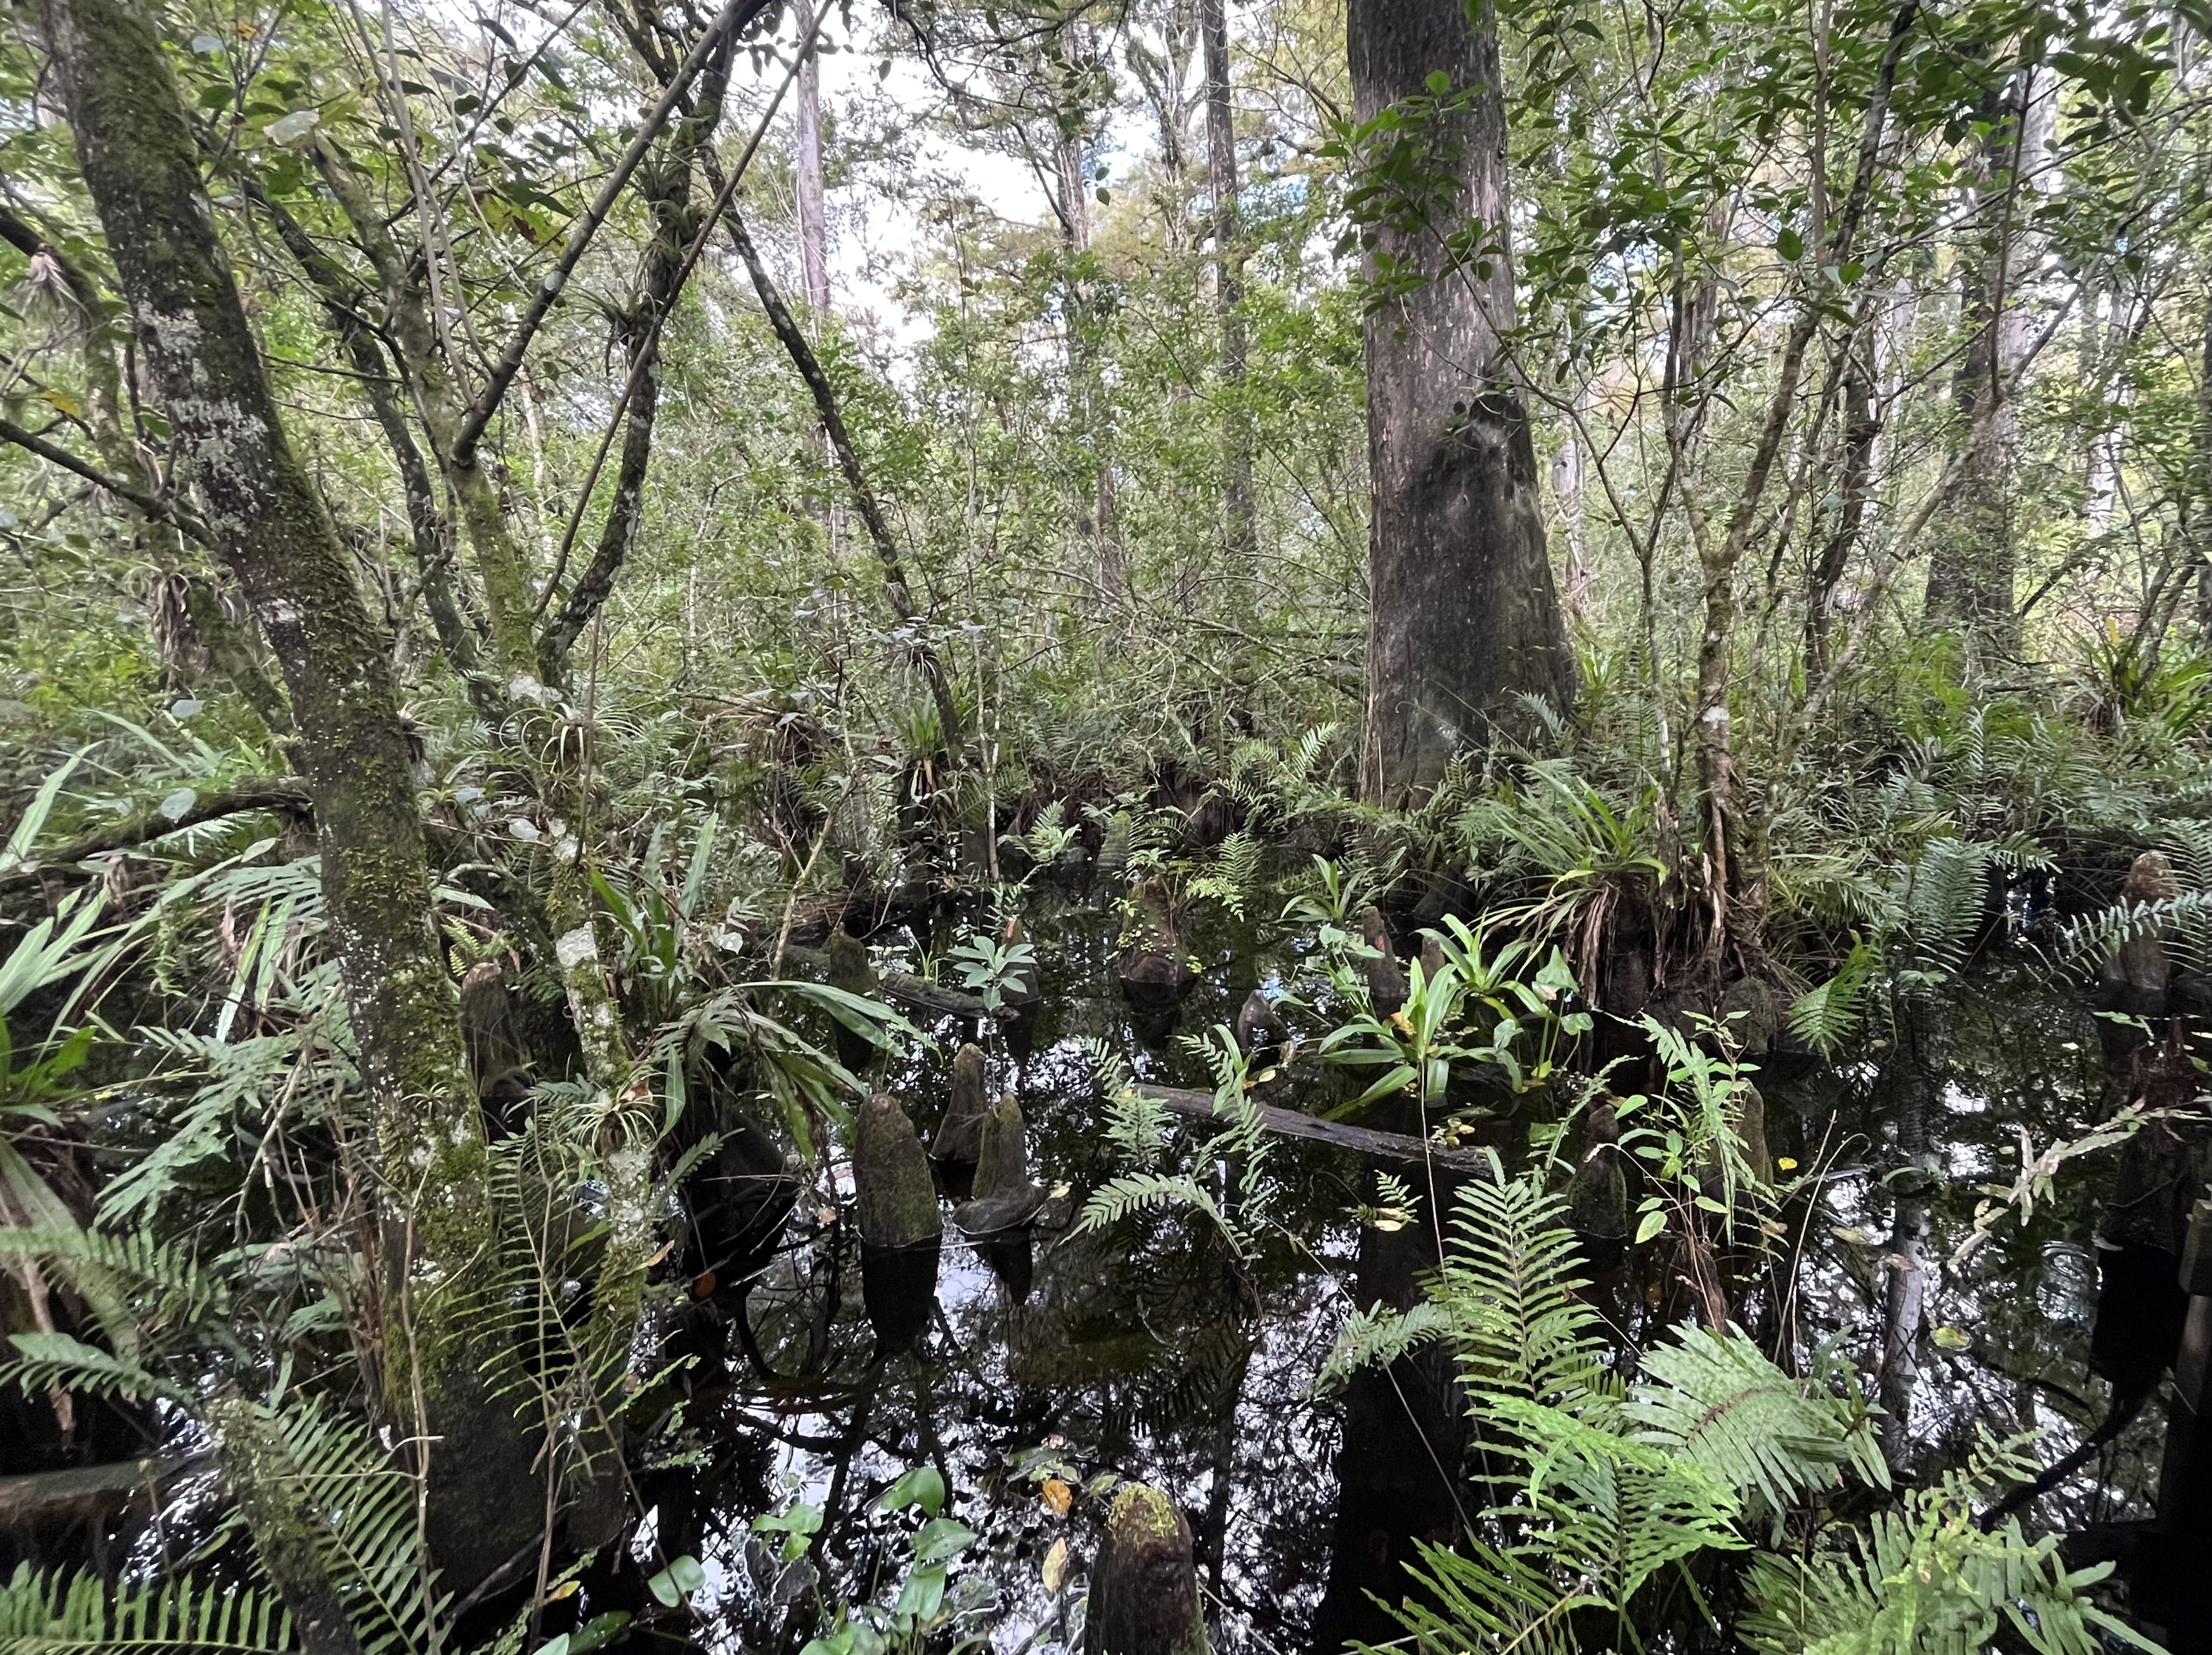 Cypress knees jut from dark swamp water, surrounded by lush green ferns.